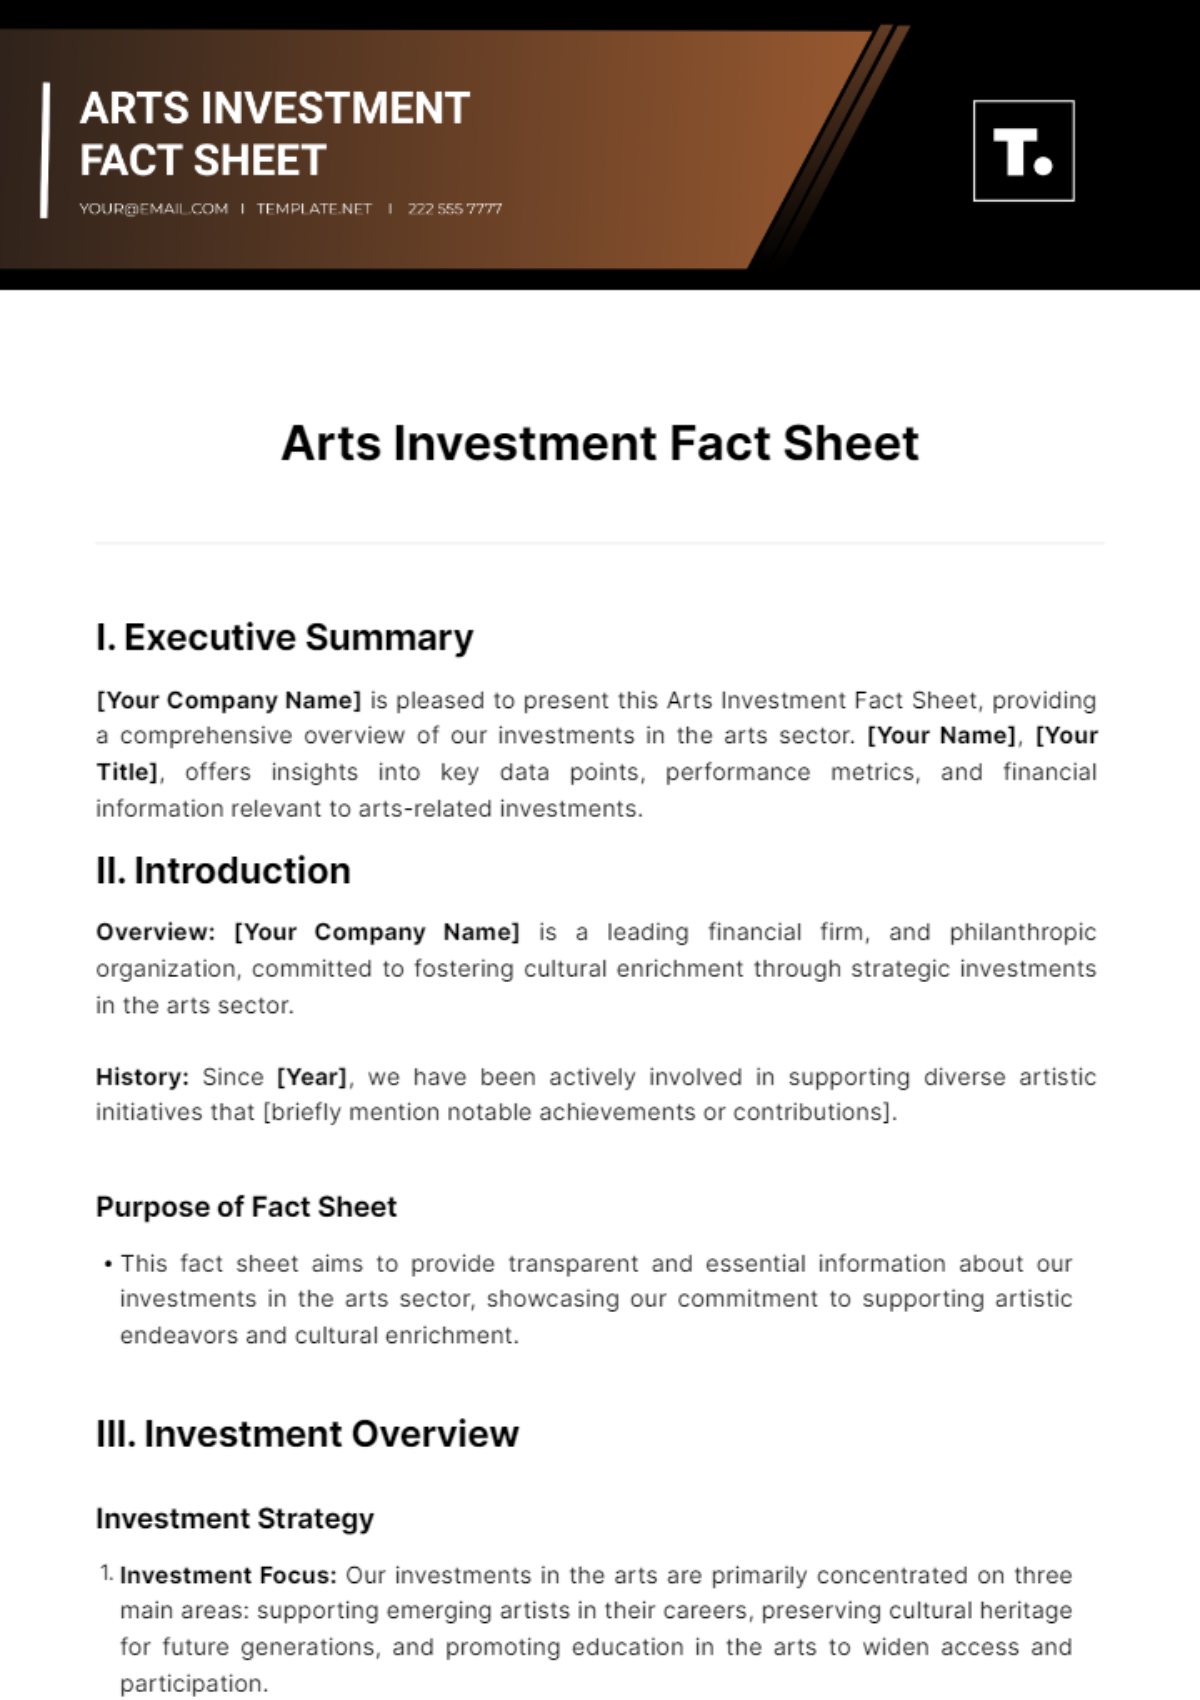 Arts Investment Fact Sheet Template